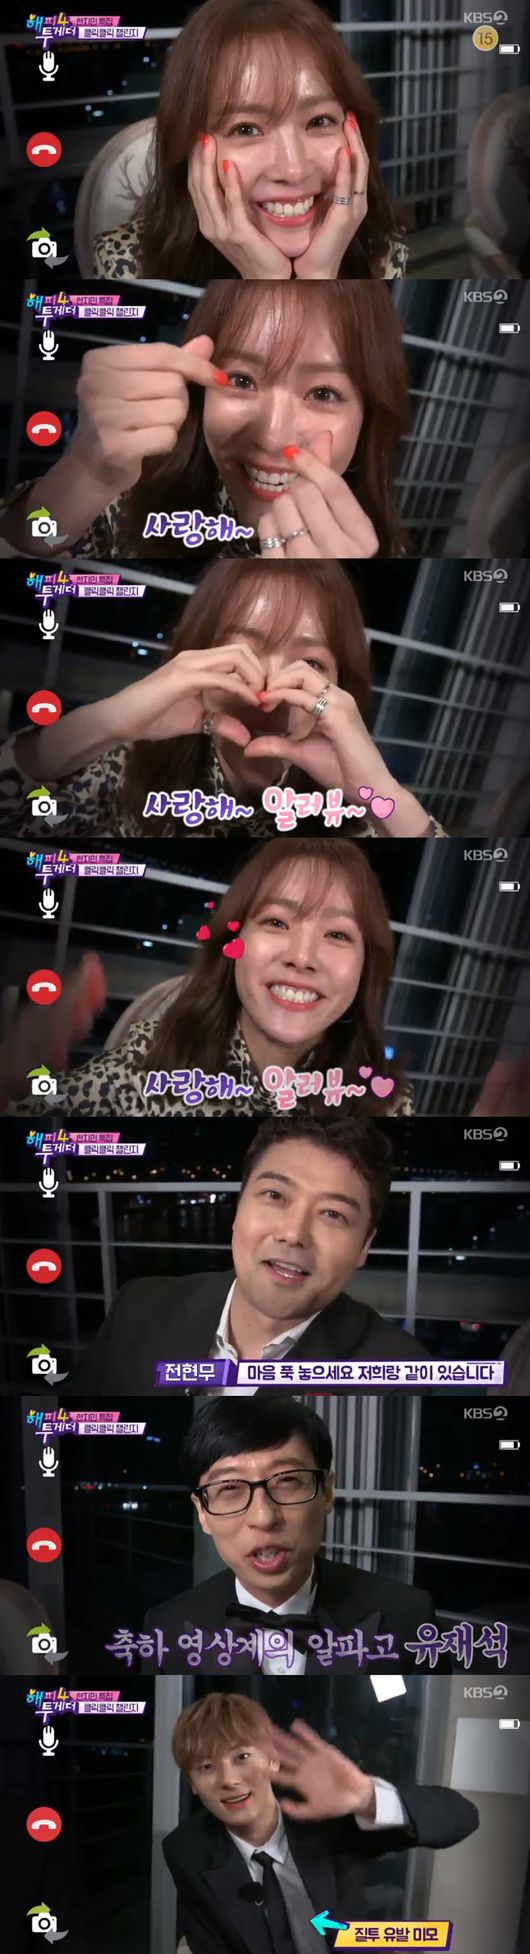 Han Jimin named Ji Sung as the best opponent.On the 11th KBS 2TV entertainment Happy Together 4, special MC Ji Sang-ryul - Wanna One Hwang Min-hyun appeared.Han Jimin appeared as a guest and exploded the sense of entertainment that had been hidden and hidden.MCs headed to Busan to meet Han Jimin, who said, Busan Film Festival is the first.When I came to the festival, I wanted to bring my work, but it is meaningful to see society. Han Jimin said of the rumor that Wannable was Mr. Min Hyuns makeup teacher did it with me. My younger brother was a fan of Wanna One.So I wanted to accept the sign too much. I received the sign through the designer and delivered it. On that day, Hwang gave Han Jimin a sweet song, saying, I think its the first time someone has ever called me this, Im so ashamed.I love the voice, he said.Han Jimin special: Good Question Bad Question Strange Question cornerThe affluent Han Jimin said, The injection is getting better, happy and yes, but there was a time when it was hard in the past, and I drank and cried.The boss said that Han Jimin had a hard time, he said, and I cried more when I heard that story. It was when the drama Dokkaebi was broadcast, he said. I wanted to have such a man because it appeared only when candles were blown.As for Gong Yoo, he explained, We shot the movie Secret together; me and Mr. Gong Yoo are like Tom and Jerry.Asked The Chemie Goddess Han Jimin about his best opponent, Han Jimin said: I think the partner bless was good.One of them said, Ji Sung, the most recent drama, he said. Its so beautiful eyes, but my heart is clear.But the most respect I have for me is that I do my best as an actor, but as a father and as a husband, I do my best.Han Jimin, who made his debut 15 years, said, When I was All in, he appeared as a child of Song Hye-kyo.I did not think I would have an audition, so I went on a trip, but I went to audition again because I had not been cast yet. Han Jimins acquaintance, Hyeri and Vicks Yen and Park Hyung-sik appeared to reveal Jimins story.Han Jimin is a fixer, Han Jimin is a black knight, Park Hyung-sik said of Han Jimin, I was very surprised to see the first impressions brilliantly.I was also really warm and nice and surprised, she said.The last corner is ClickClick Challenge, a corner where you can do Donation in the name of Han Jimin.If a star produces his own content and has more than 1 million views, Donation is possible.Asked where he wanted to donate, Han Jimin said, I shot a movie about child abuse, but it is a reality that the protection agency of abused children is lacking in our country.I want to donate to the Child Protection Center, he said.Han Jimin left a video that seemed to talk about his boyfriend and girlfriend who are popular these days.